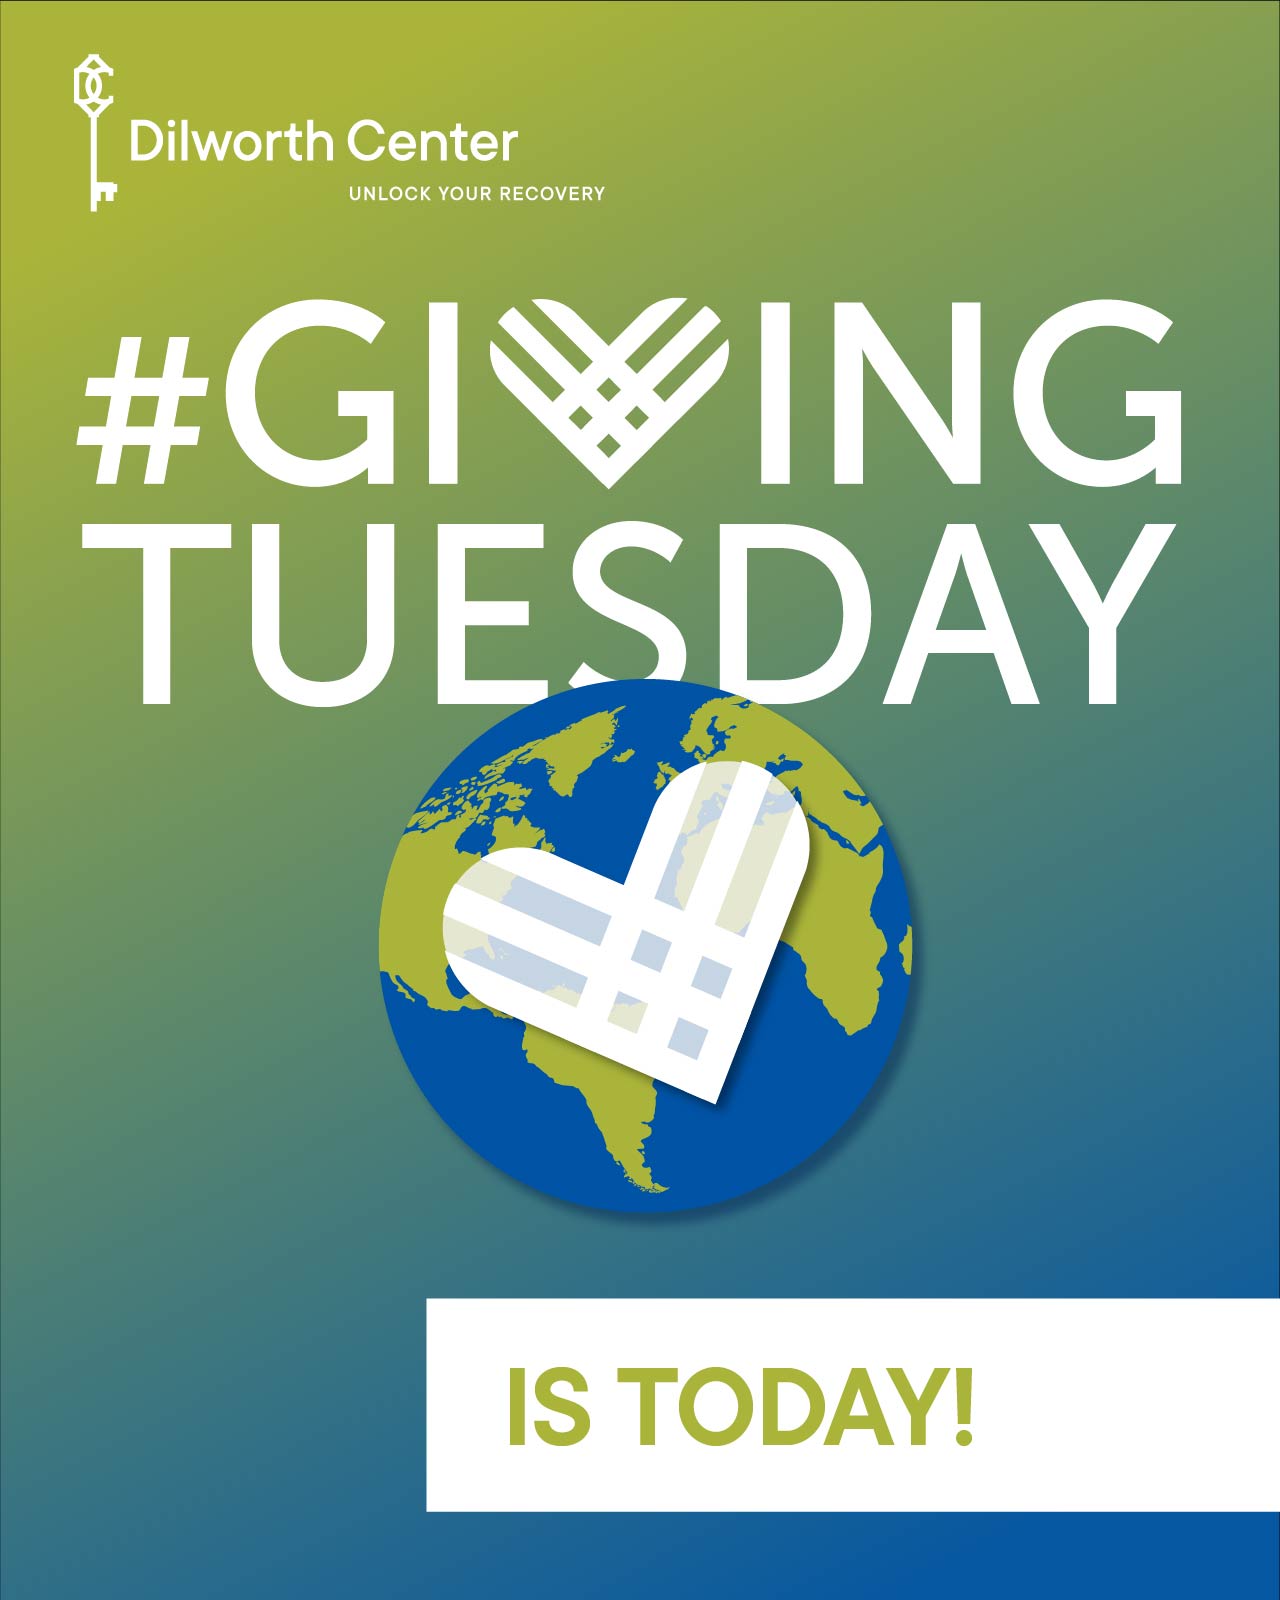 Click here to give for giving Tuesday